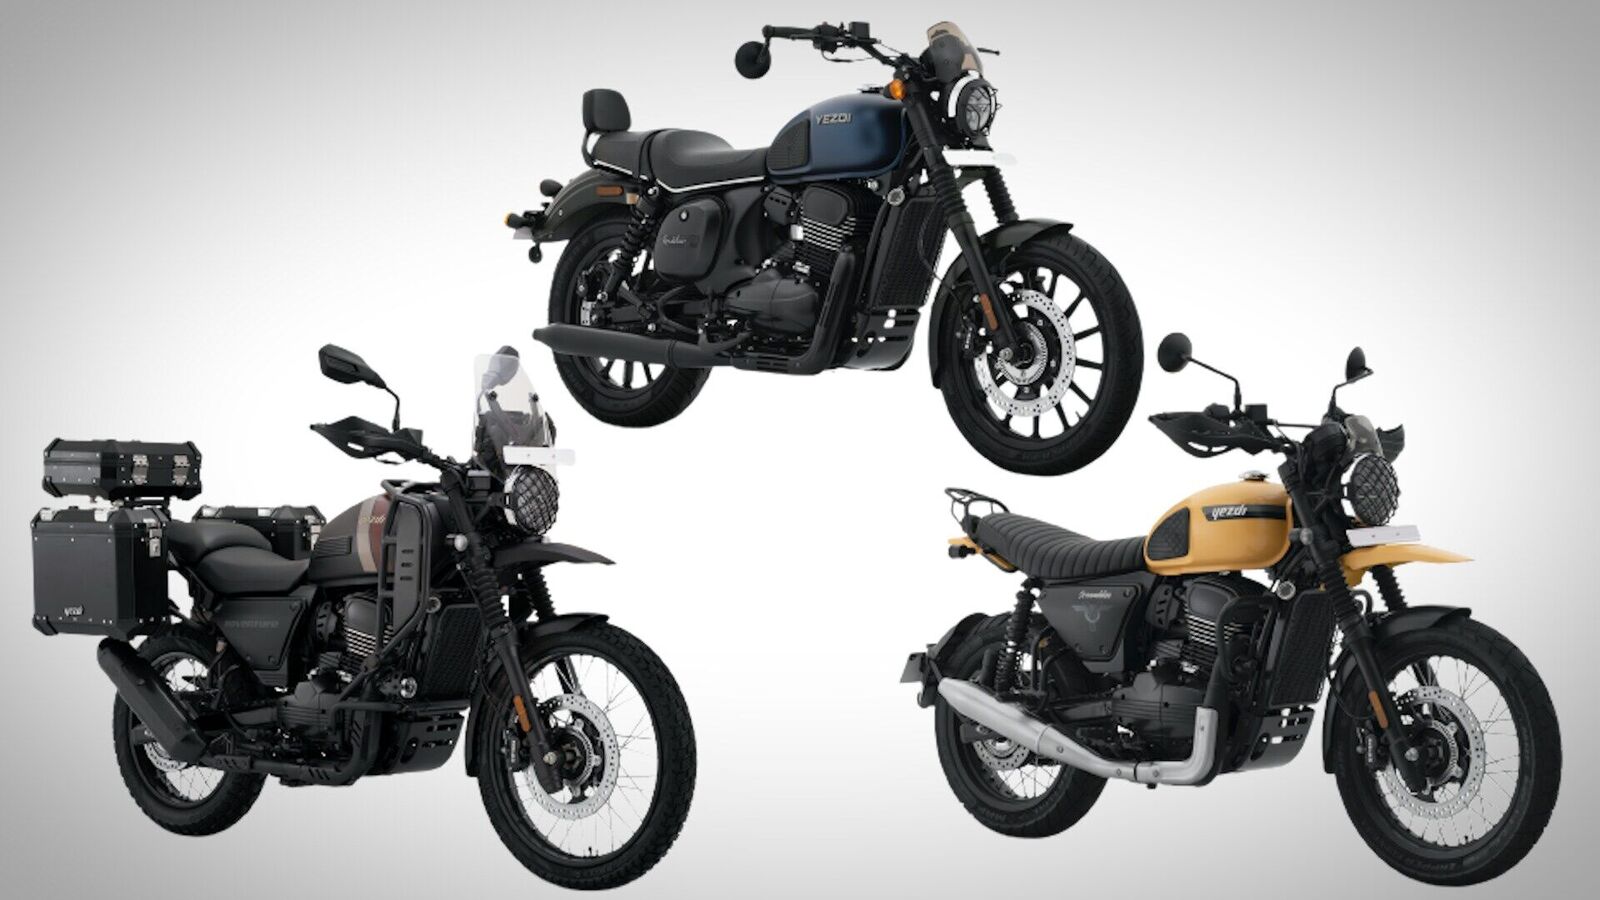 Yezdi Motorcycle Brand relaunched with Adventure, Scrambler & Roadster  models - Page 2 - Team-BHP